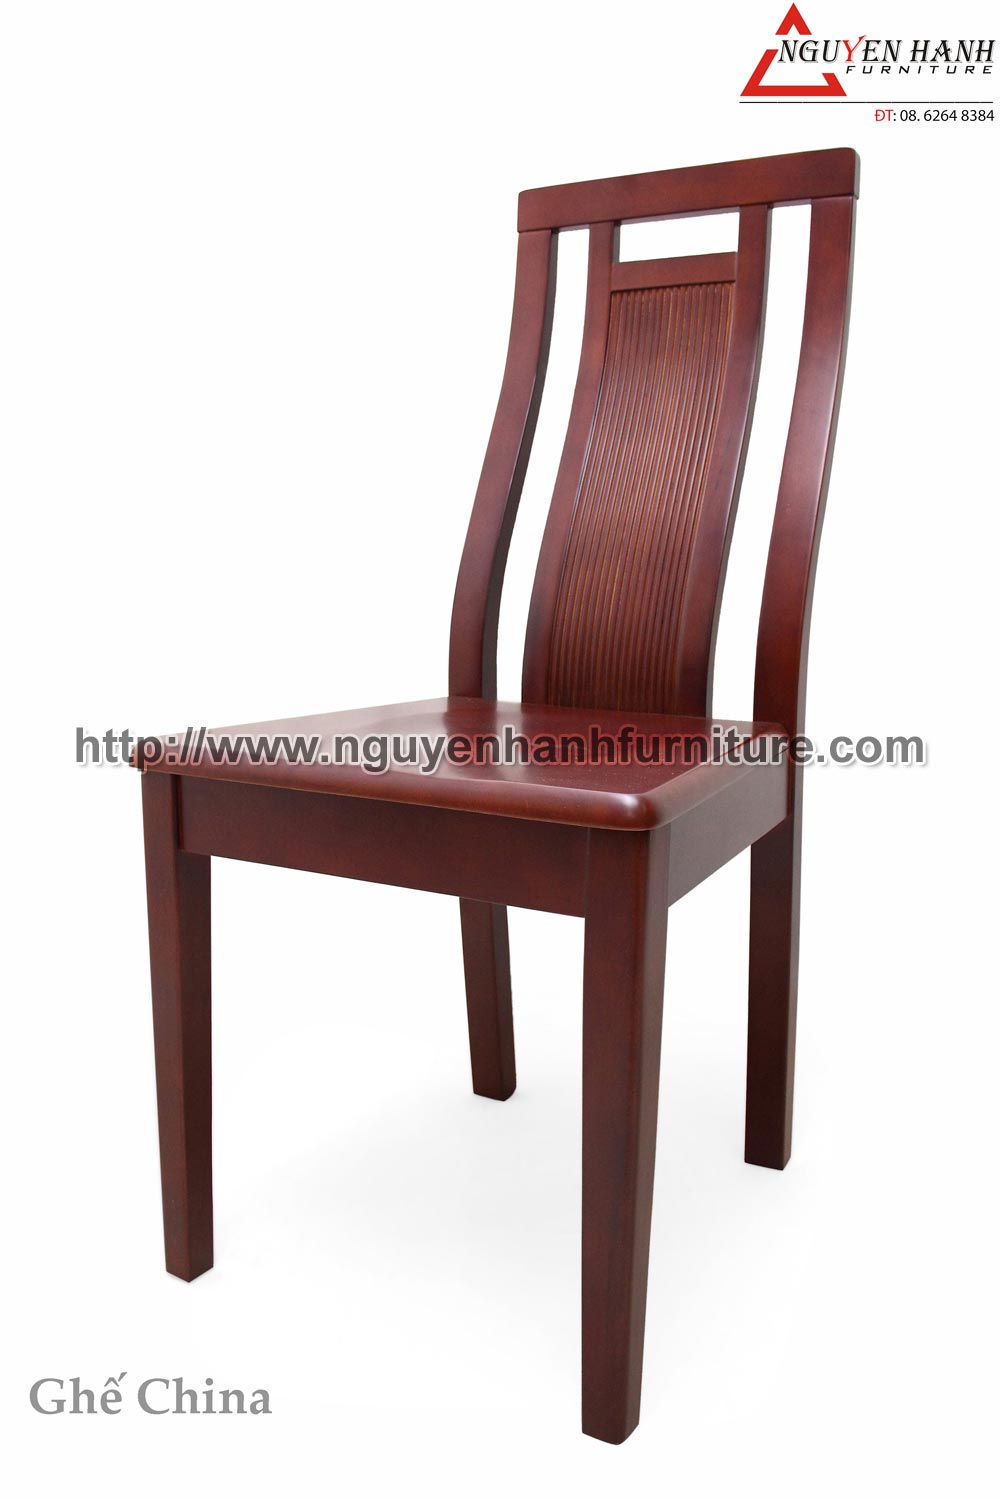 Name product: china chair- Dimensions:  - Description: Wood natural rubber